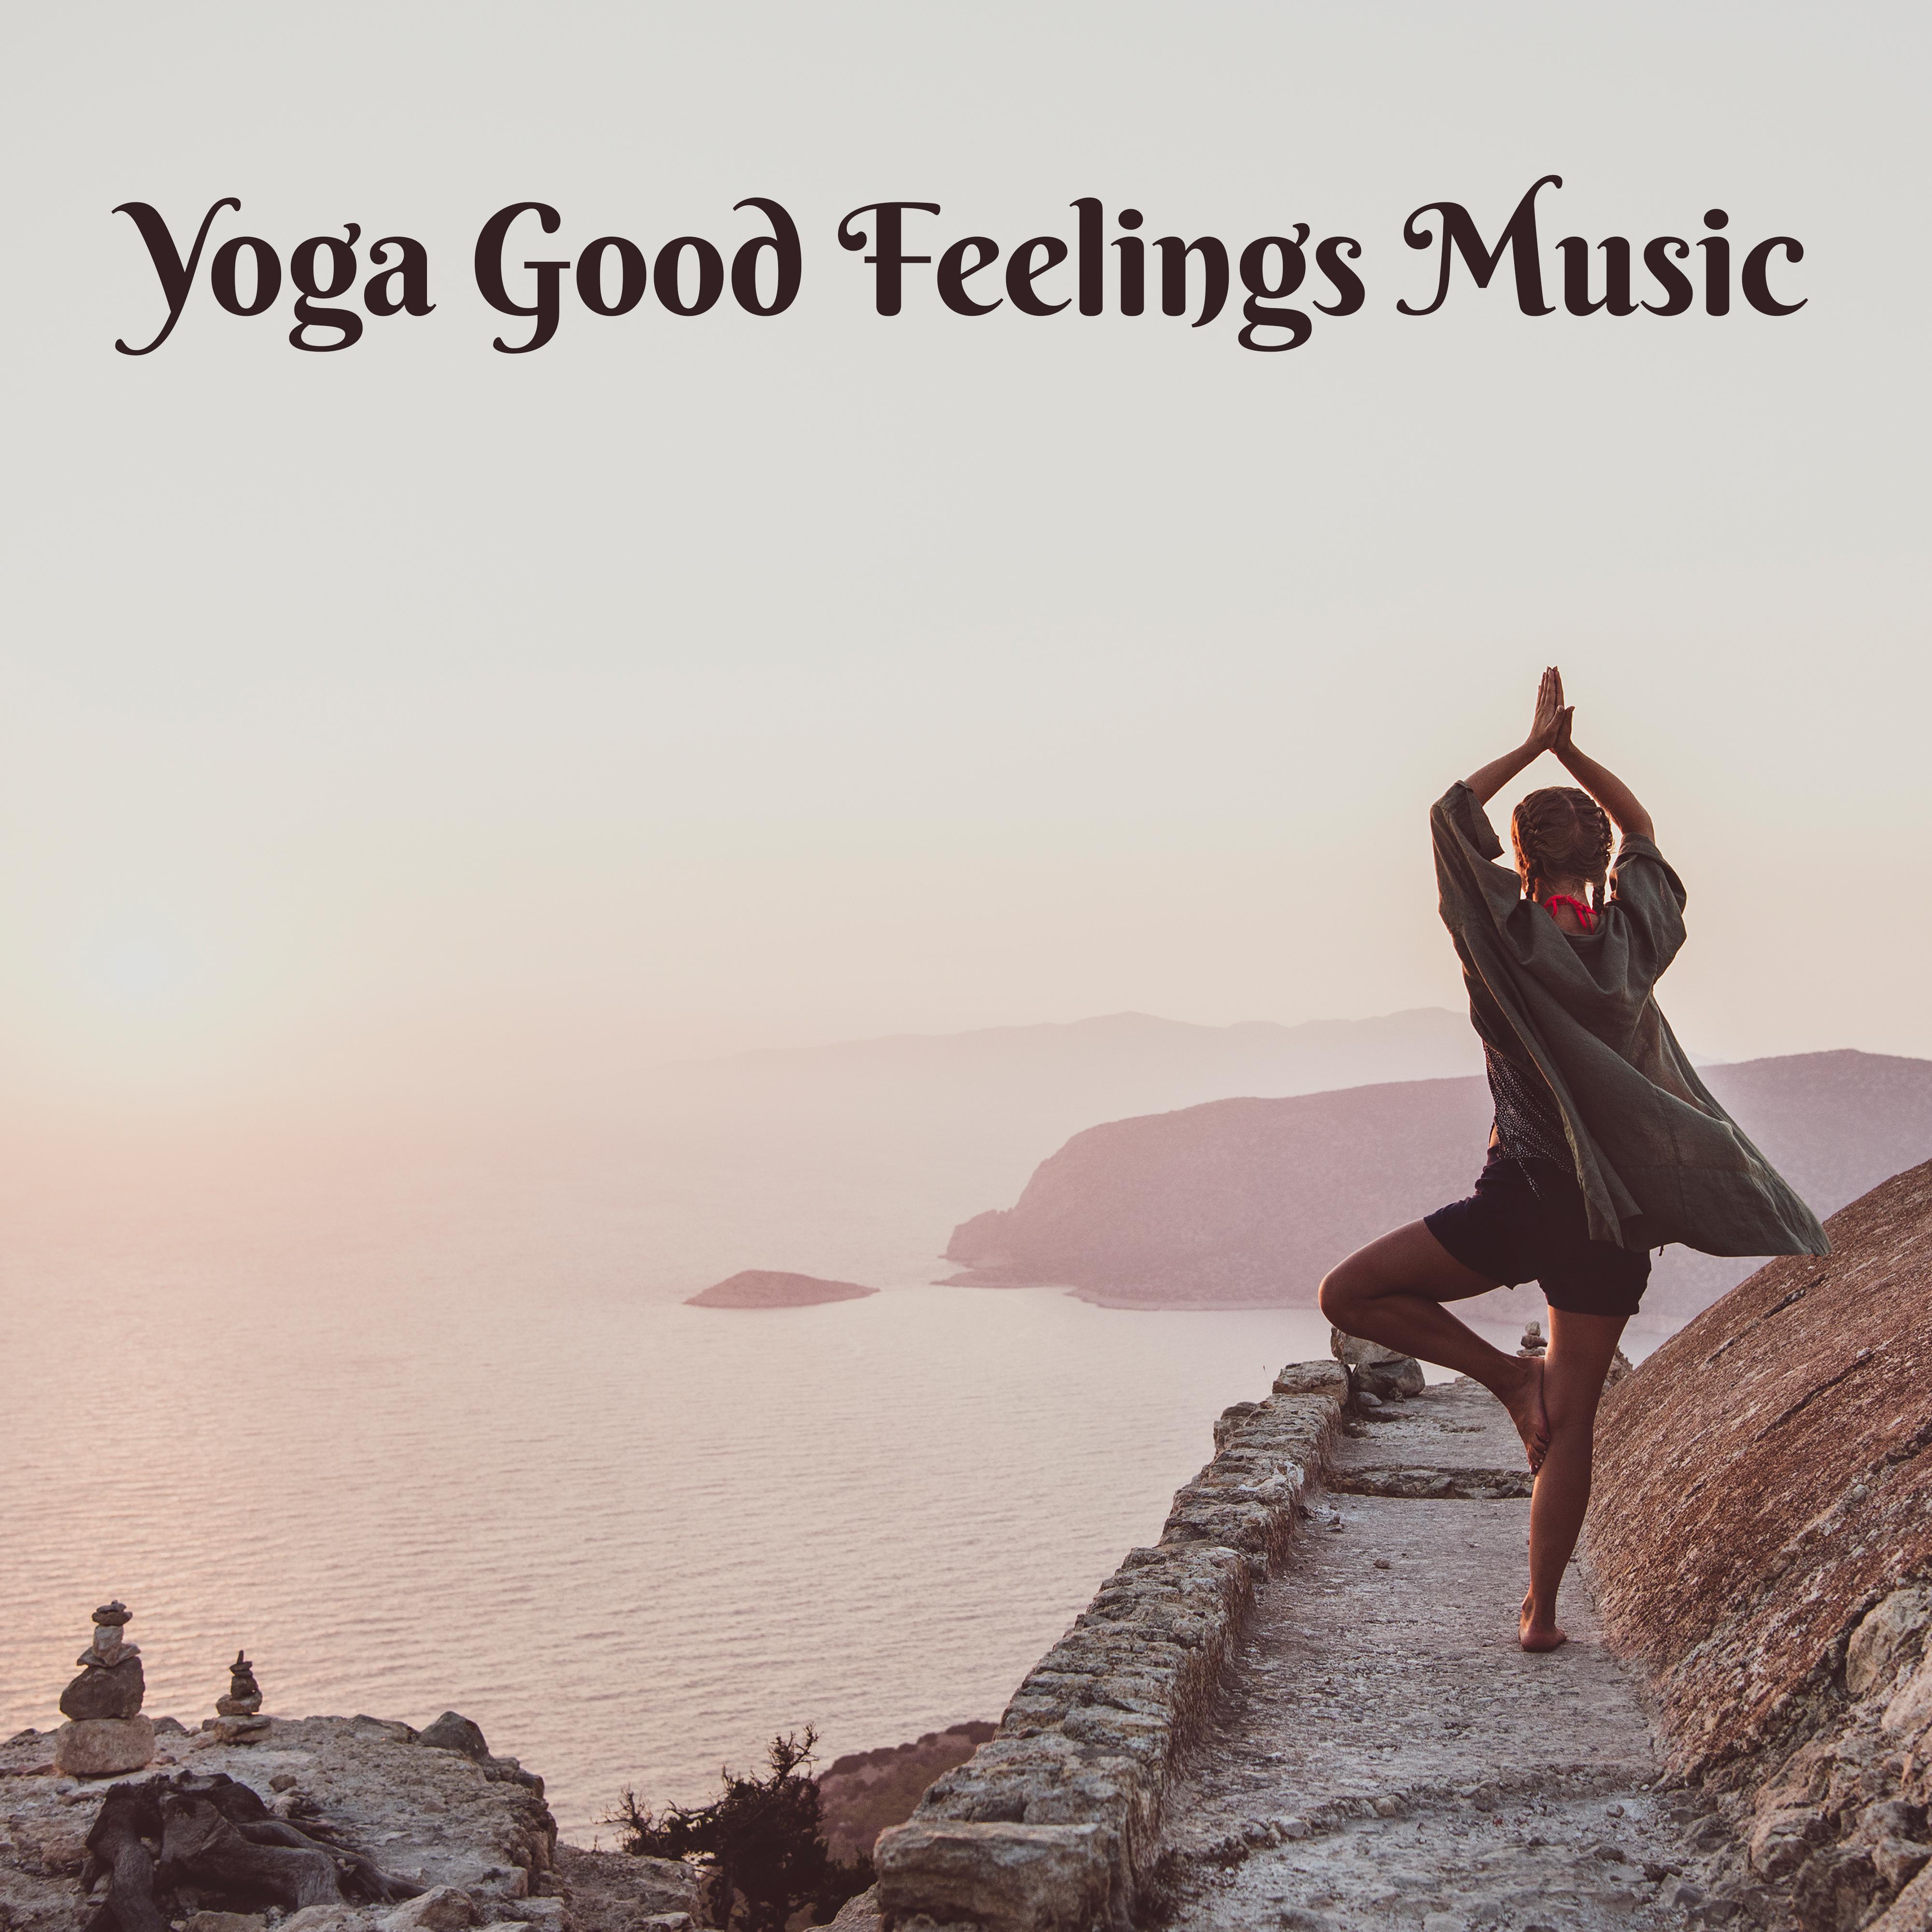 Yoga Good Feelings Music  New Age Sounds Compilation for Meditation  Mind Relaxing, Mental Journey Into Your Soul